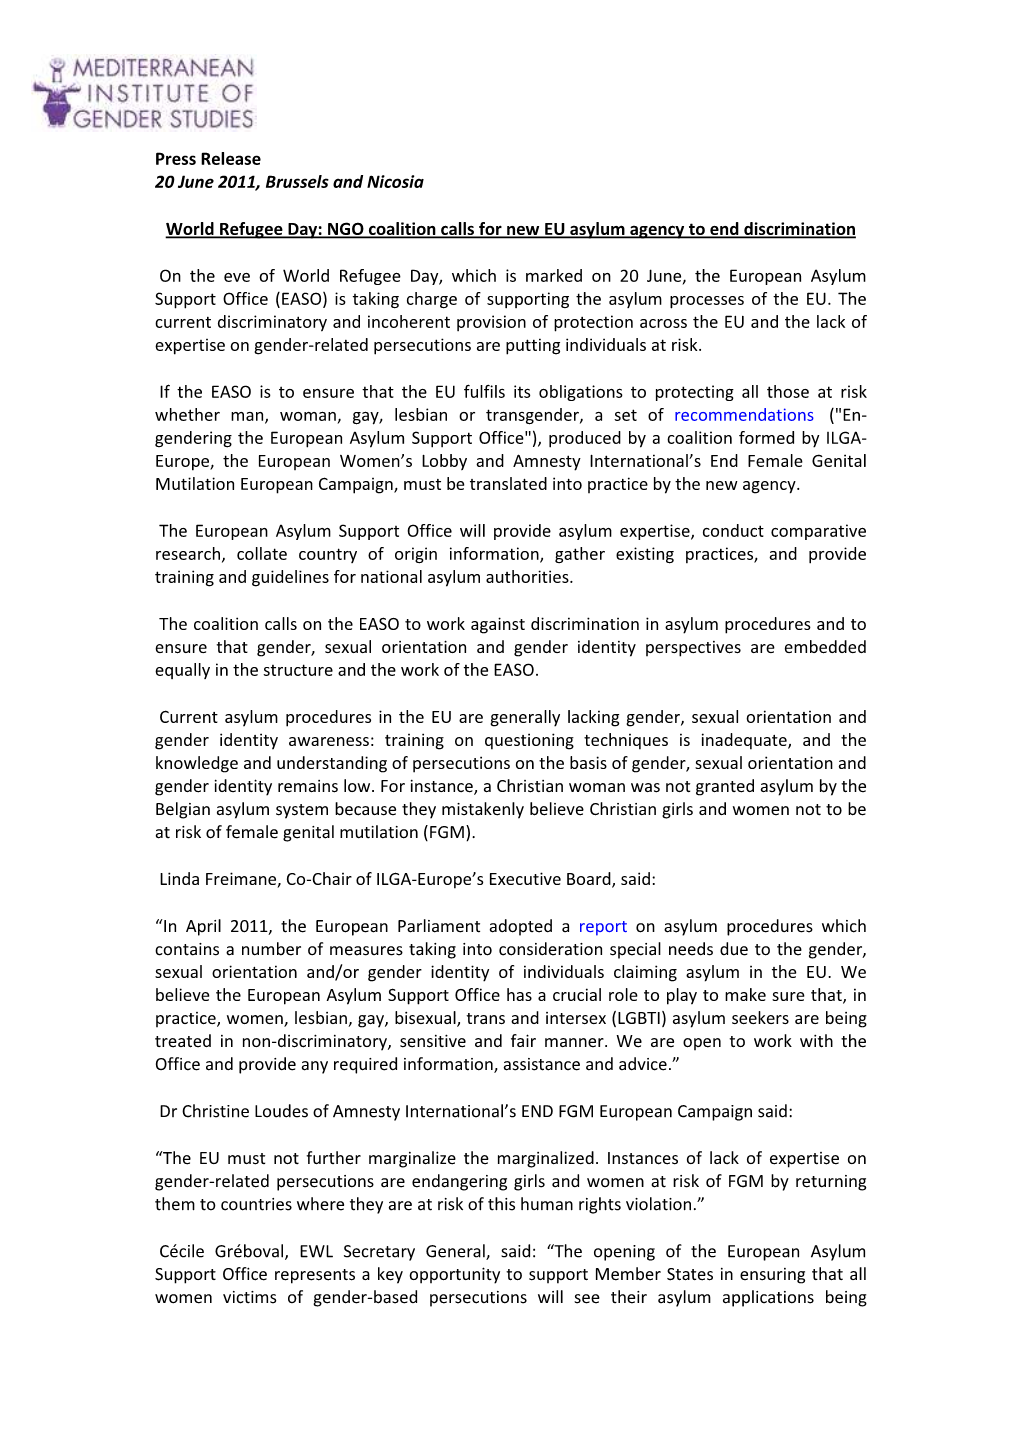 MIGS Press Release: "World Refugee Day: NGO Coalition Calls for New EU